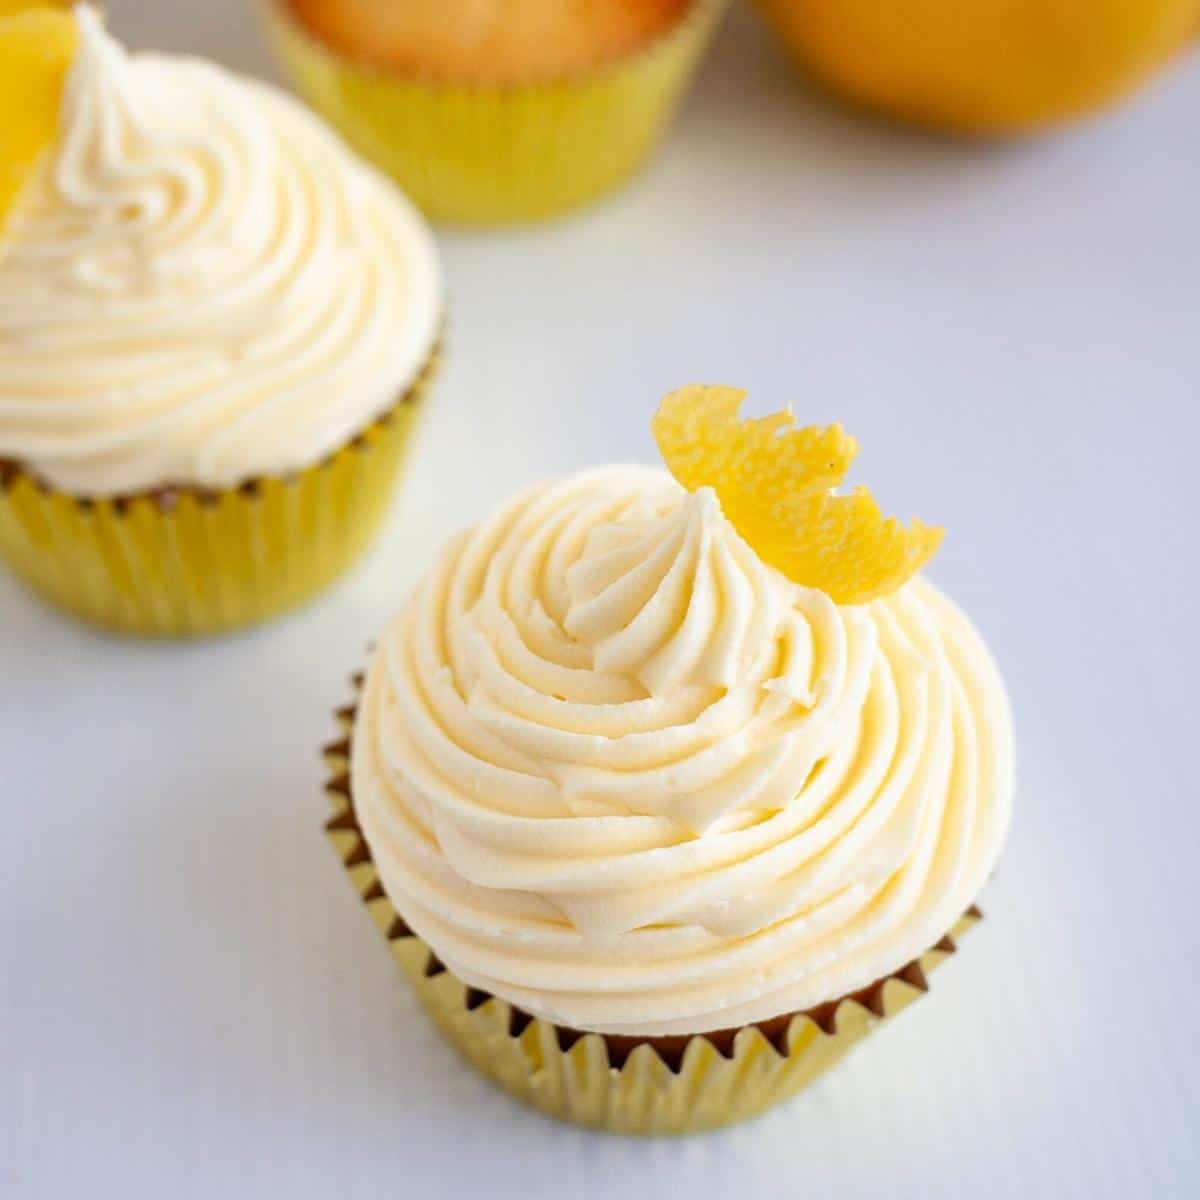 Frosted cupcakes with lemon buttercream.